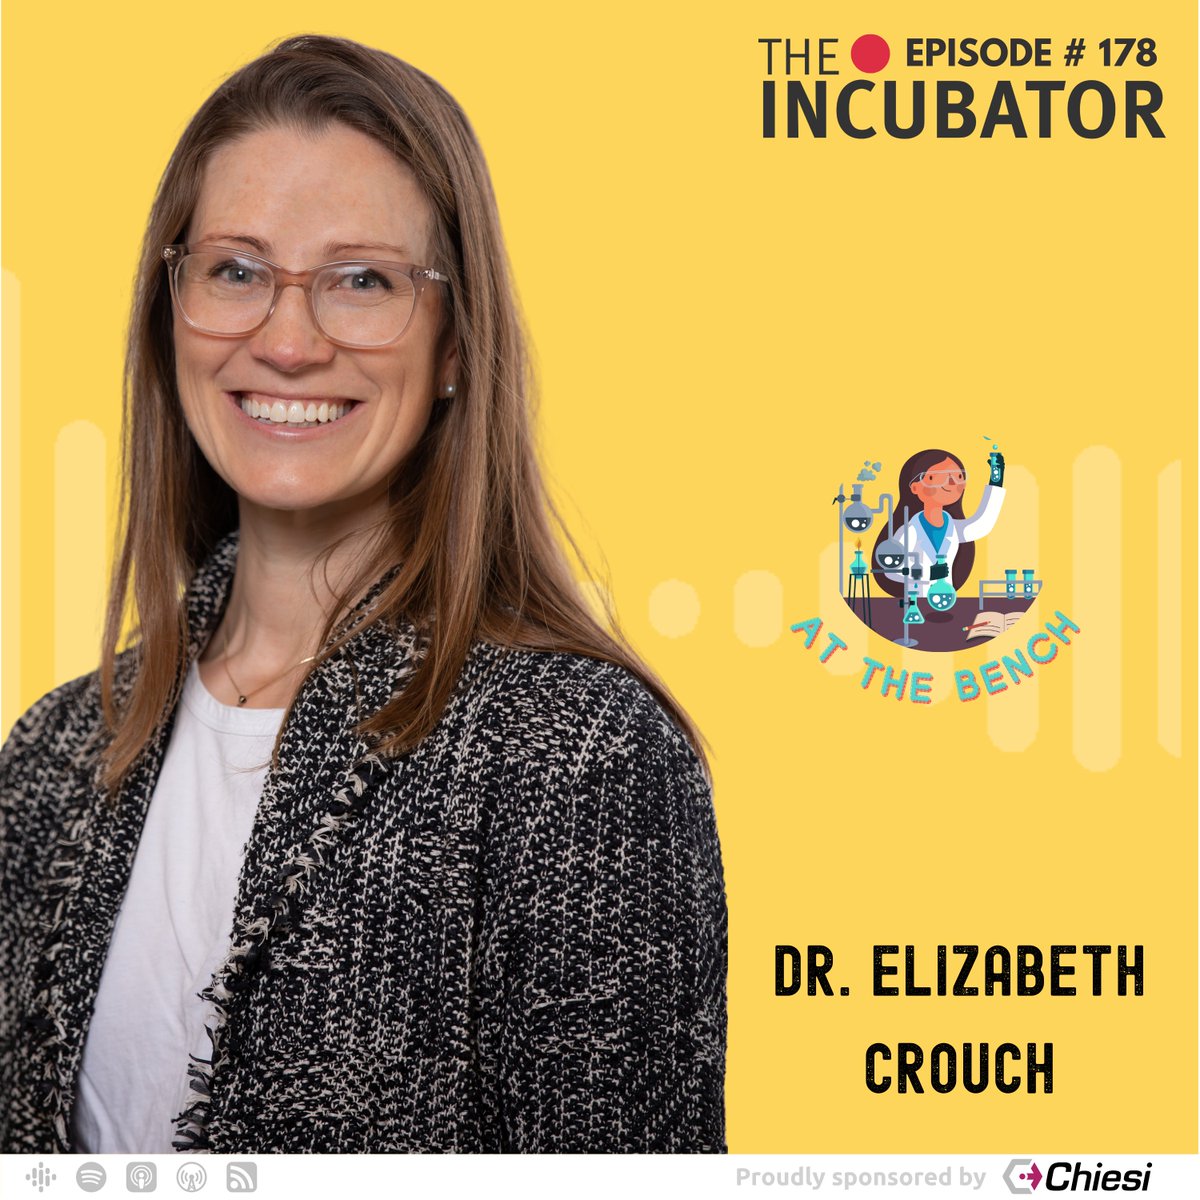 🚨🚨🚨🚨🚨 Did you see the amazing new series on The Incubator network?! We are joined by superstars Dr. @mistygoodlab, Dr. @ElizabetsCrouch and Dr. David McCulley in this exciting new adventure highlighting physician scientists that are changing the landscape of neonatal